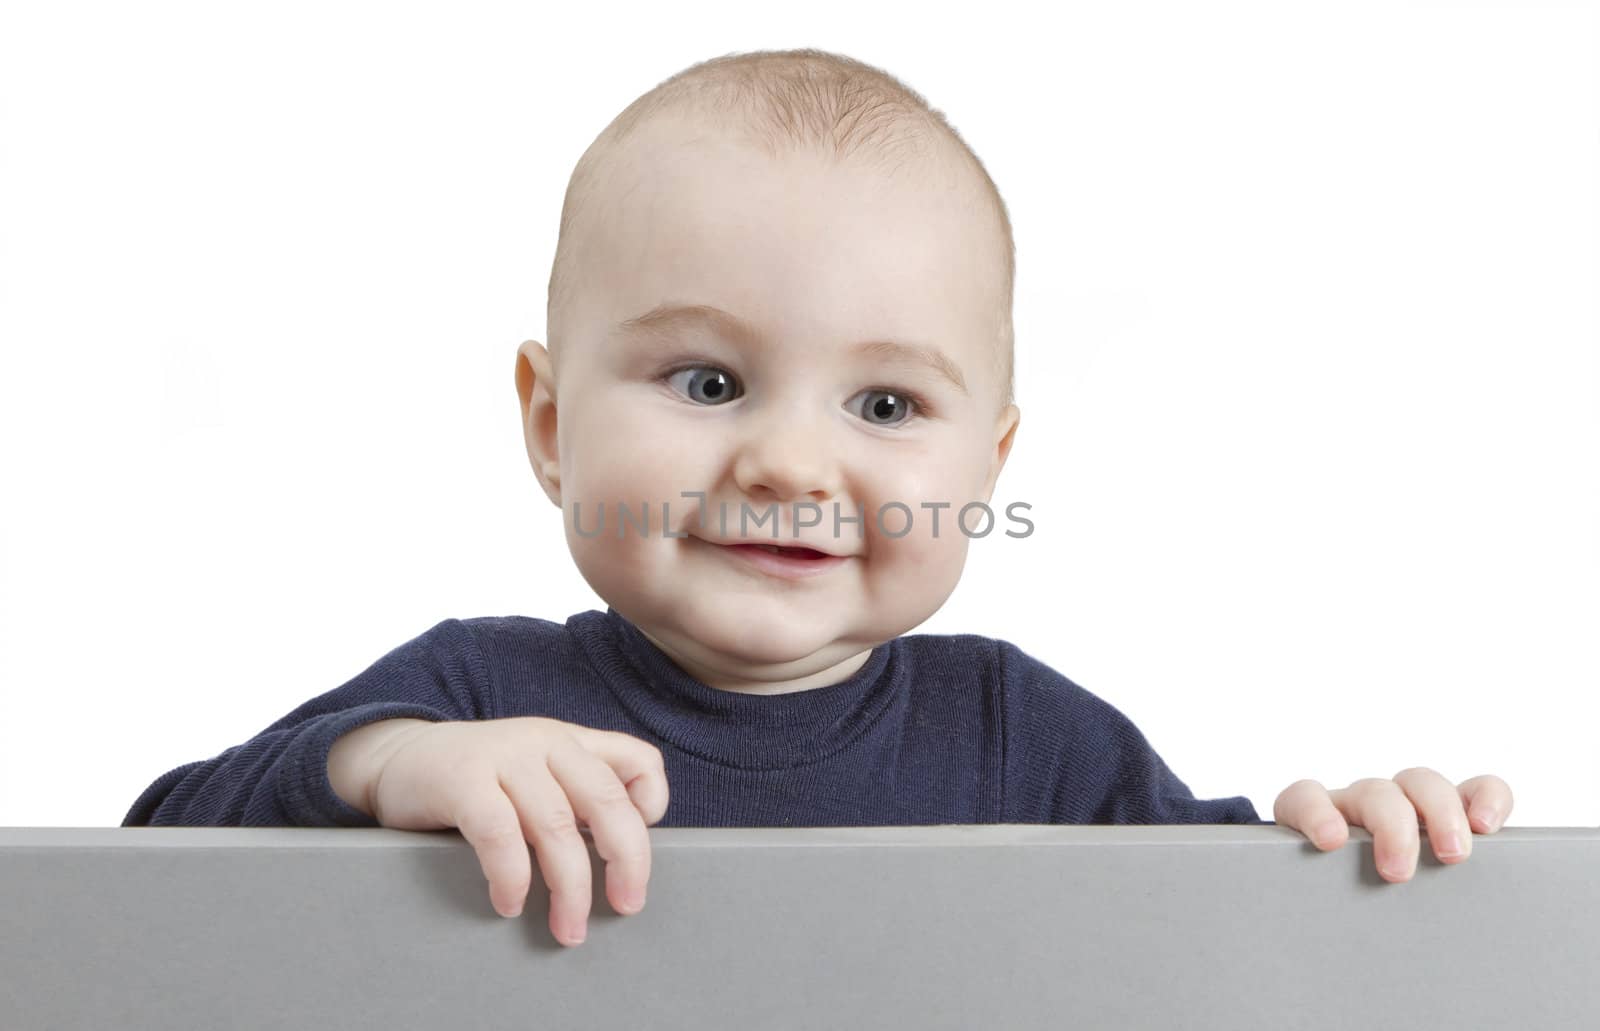 young child standing behind grey cardboard. isolate on white background